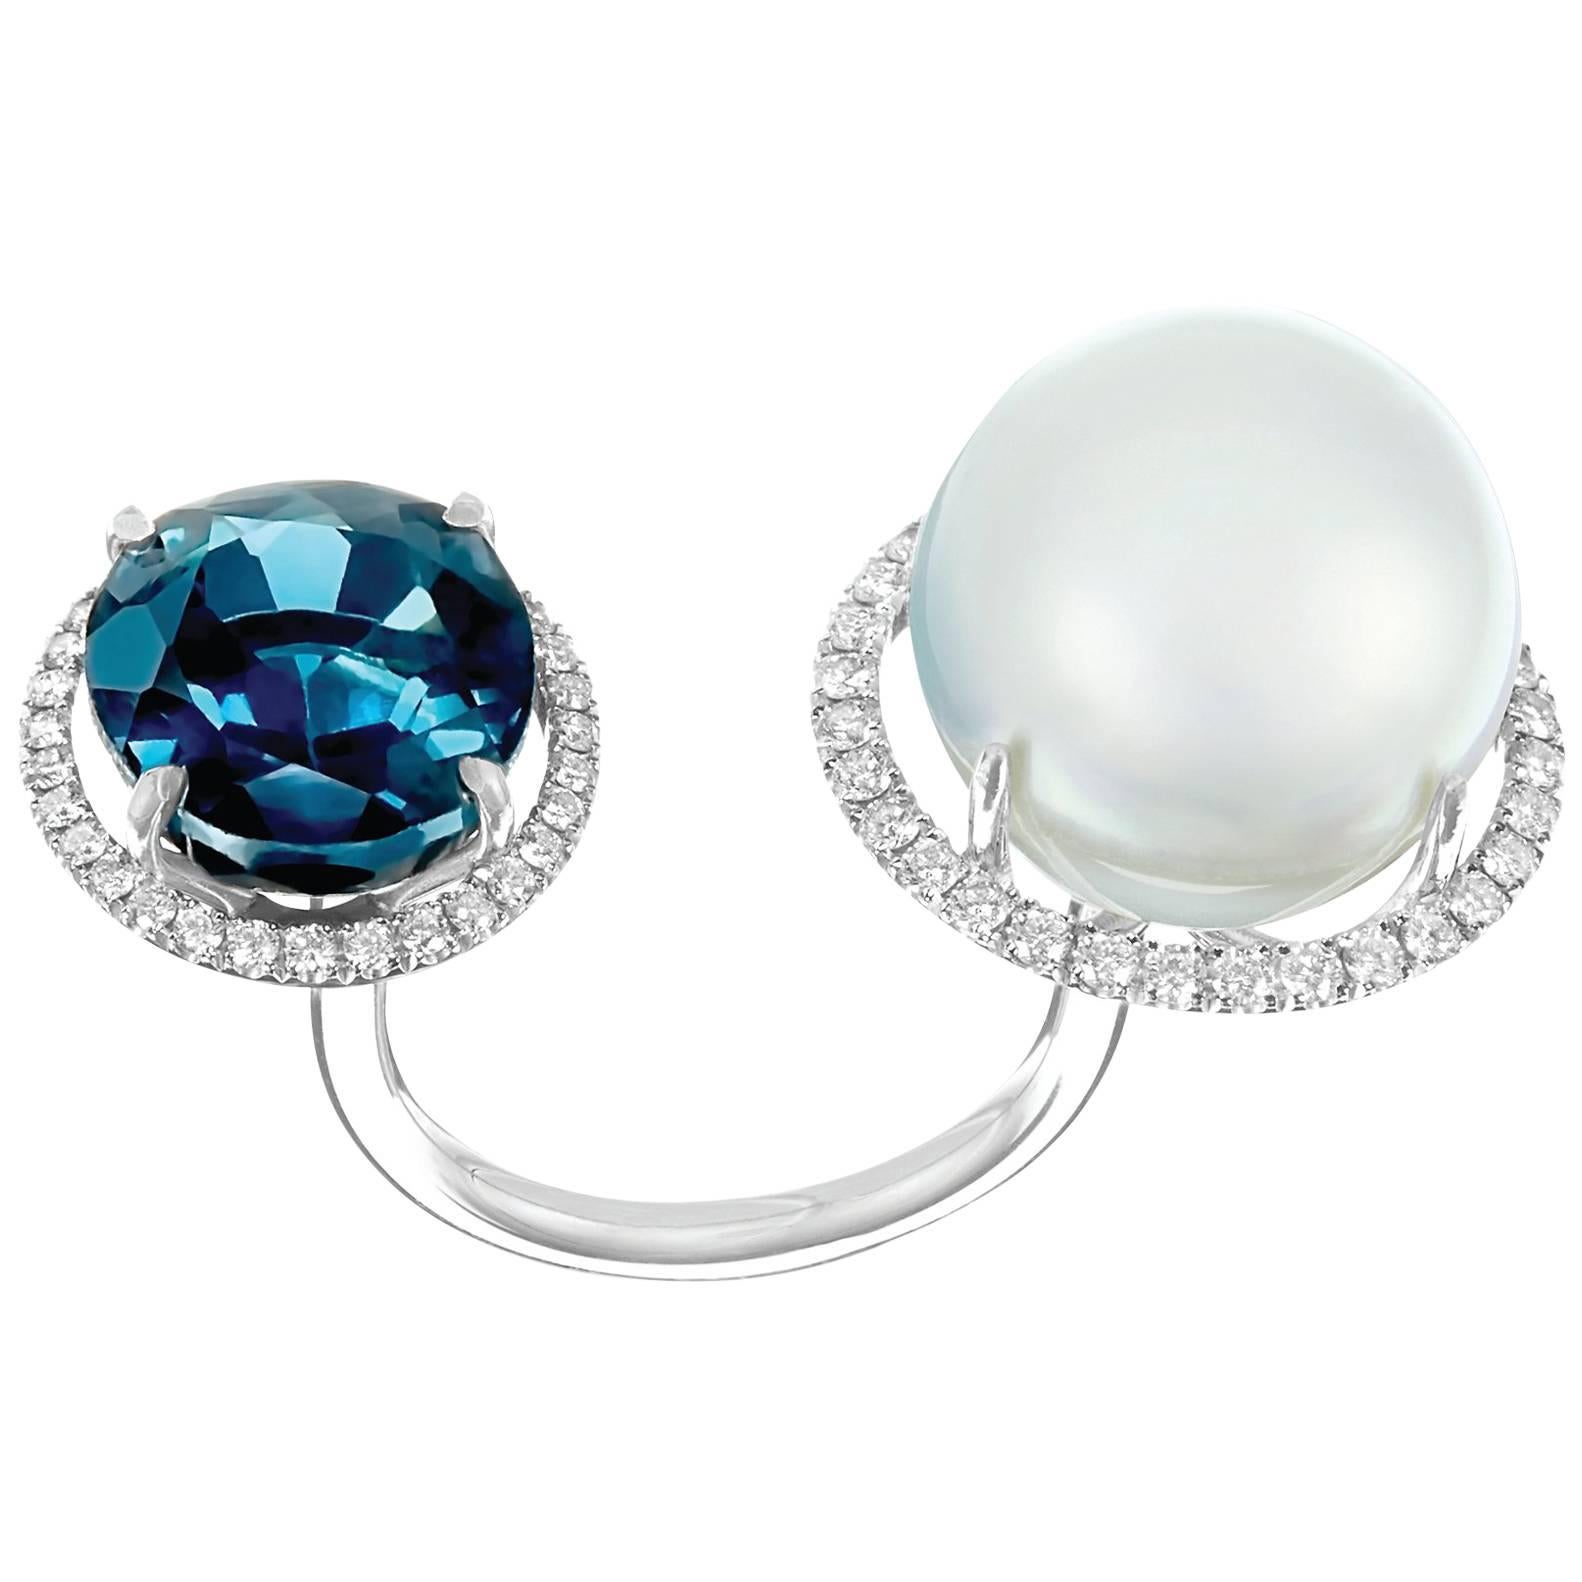 Nadine Aysoy 18K White Gold, Blue Topaz and South Sea Pearl Diamond Ring For Sale